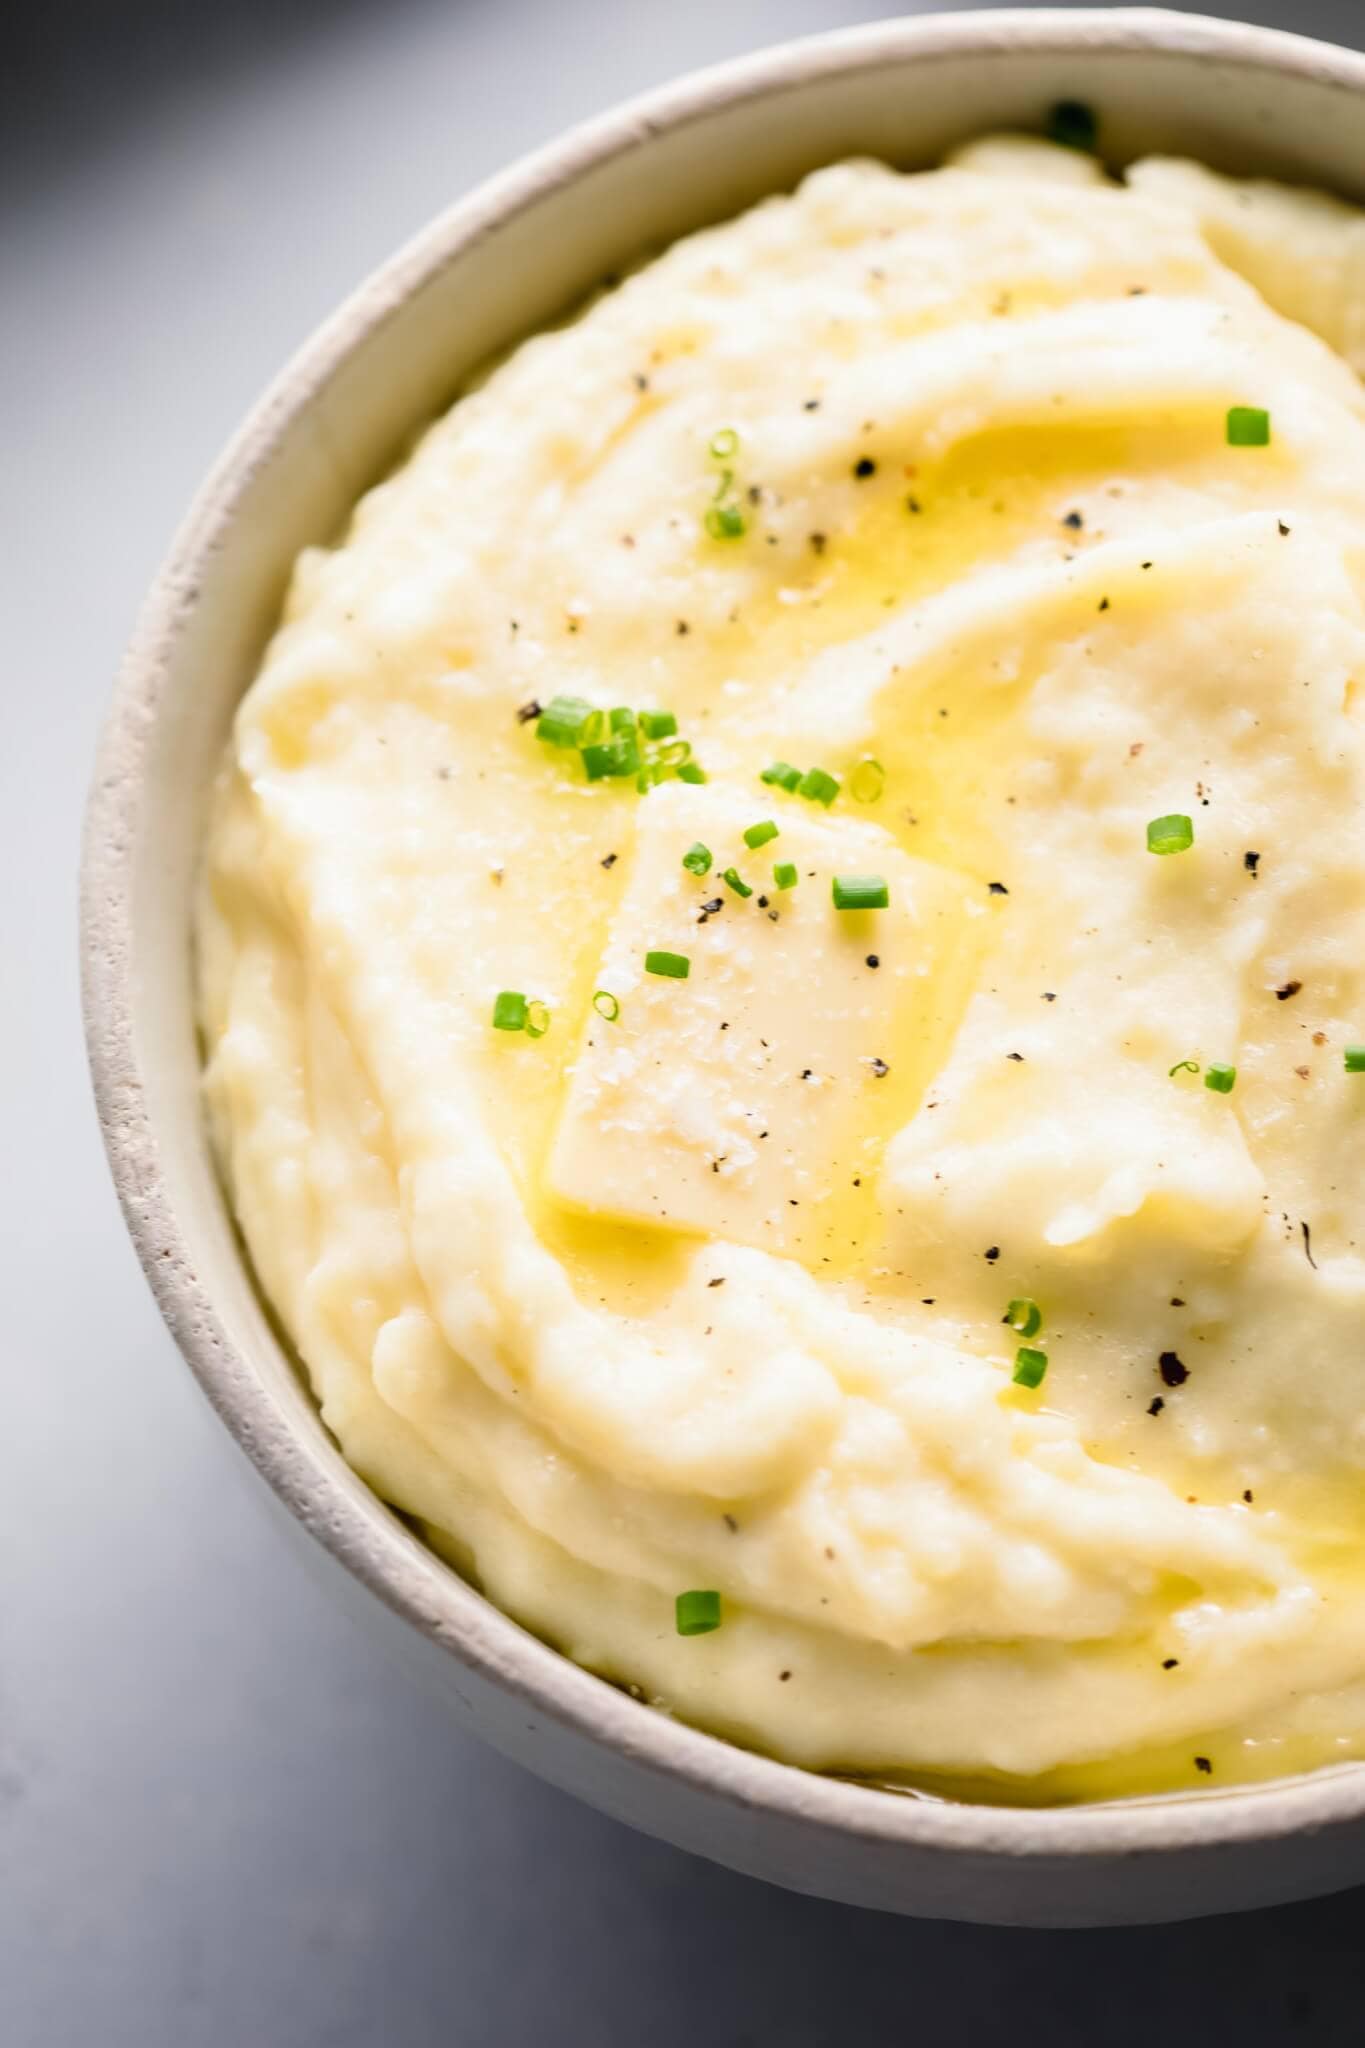 Overhead shot of bowl of mashed potatoes topped with a pat of butter.